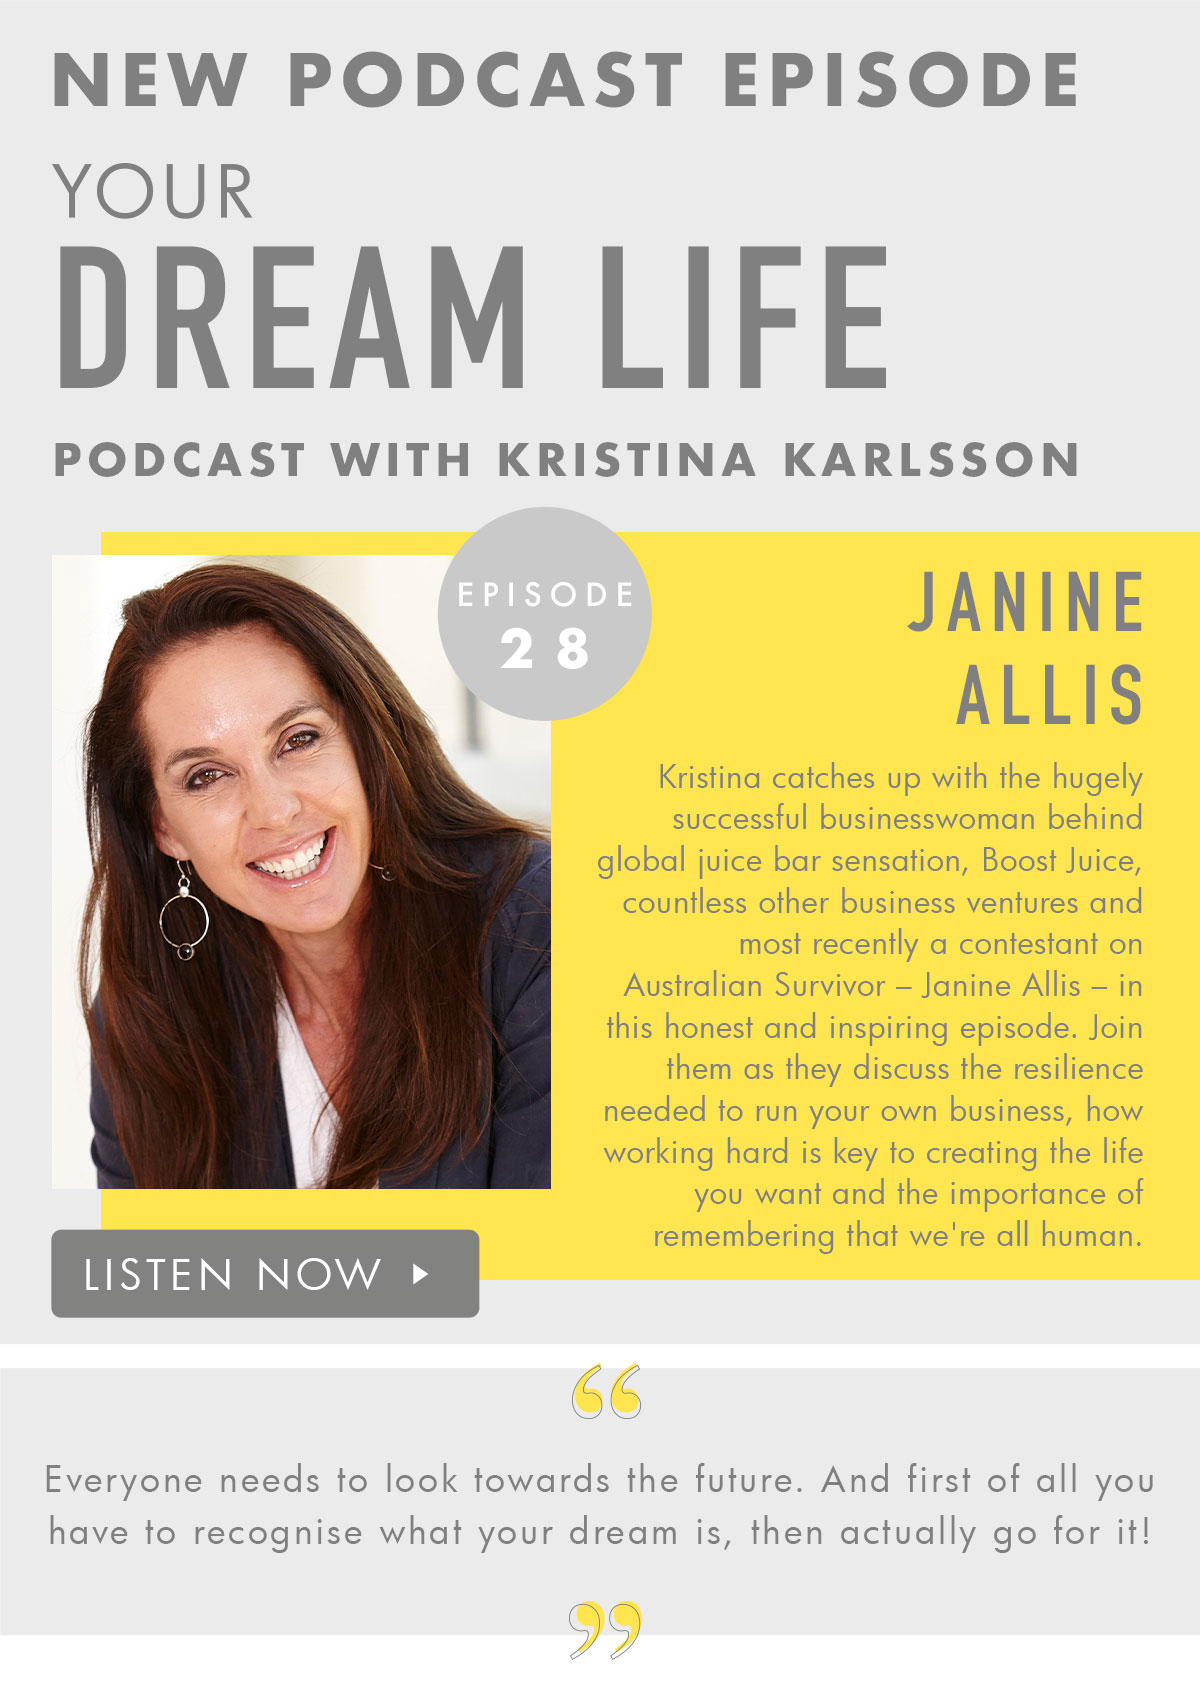 New Podcast Episode with Janine Allis. Listen now. 